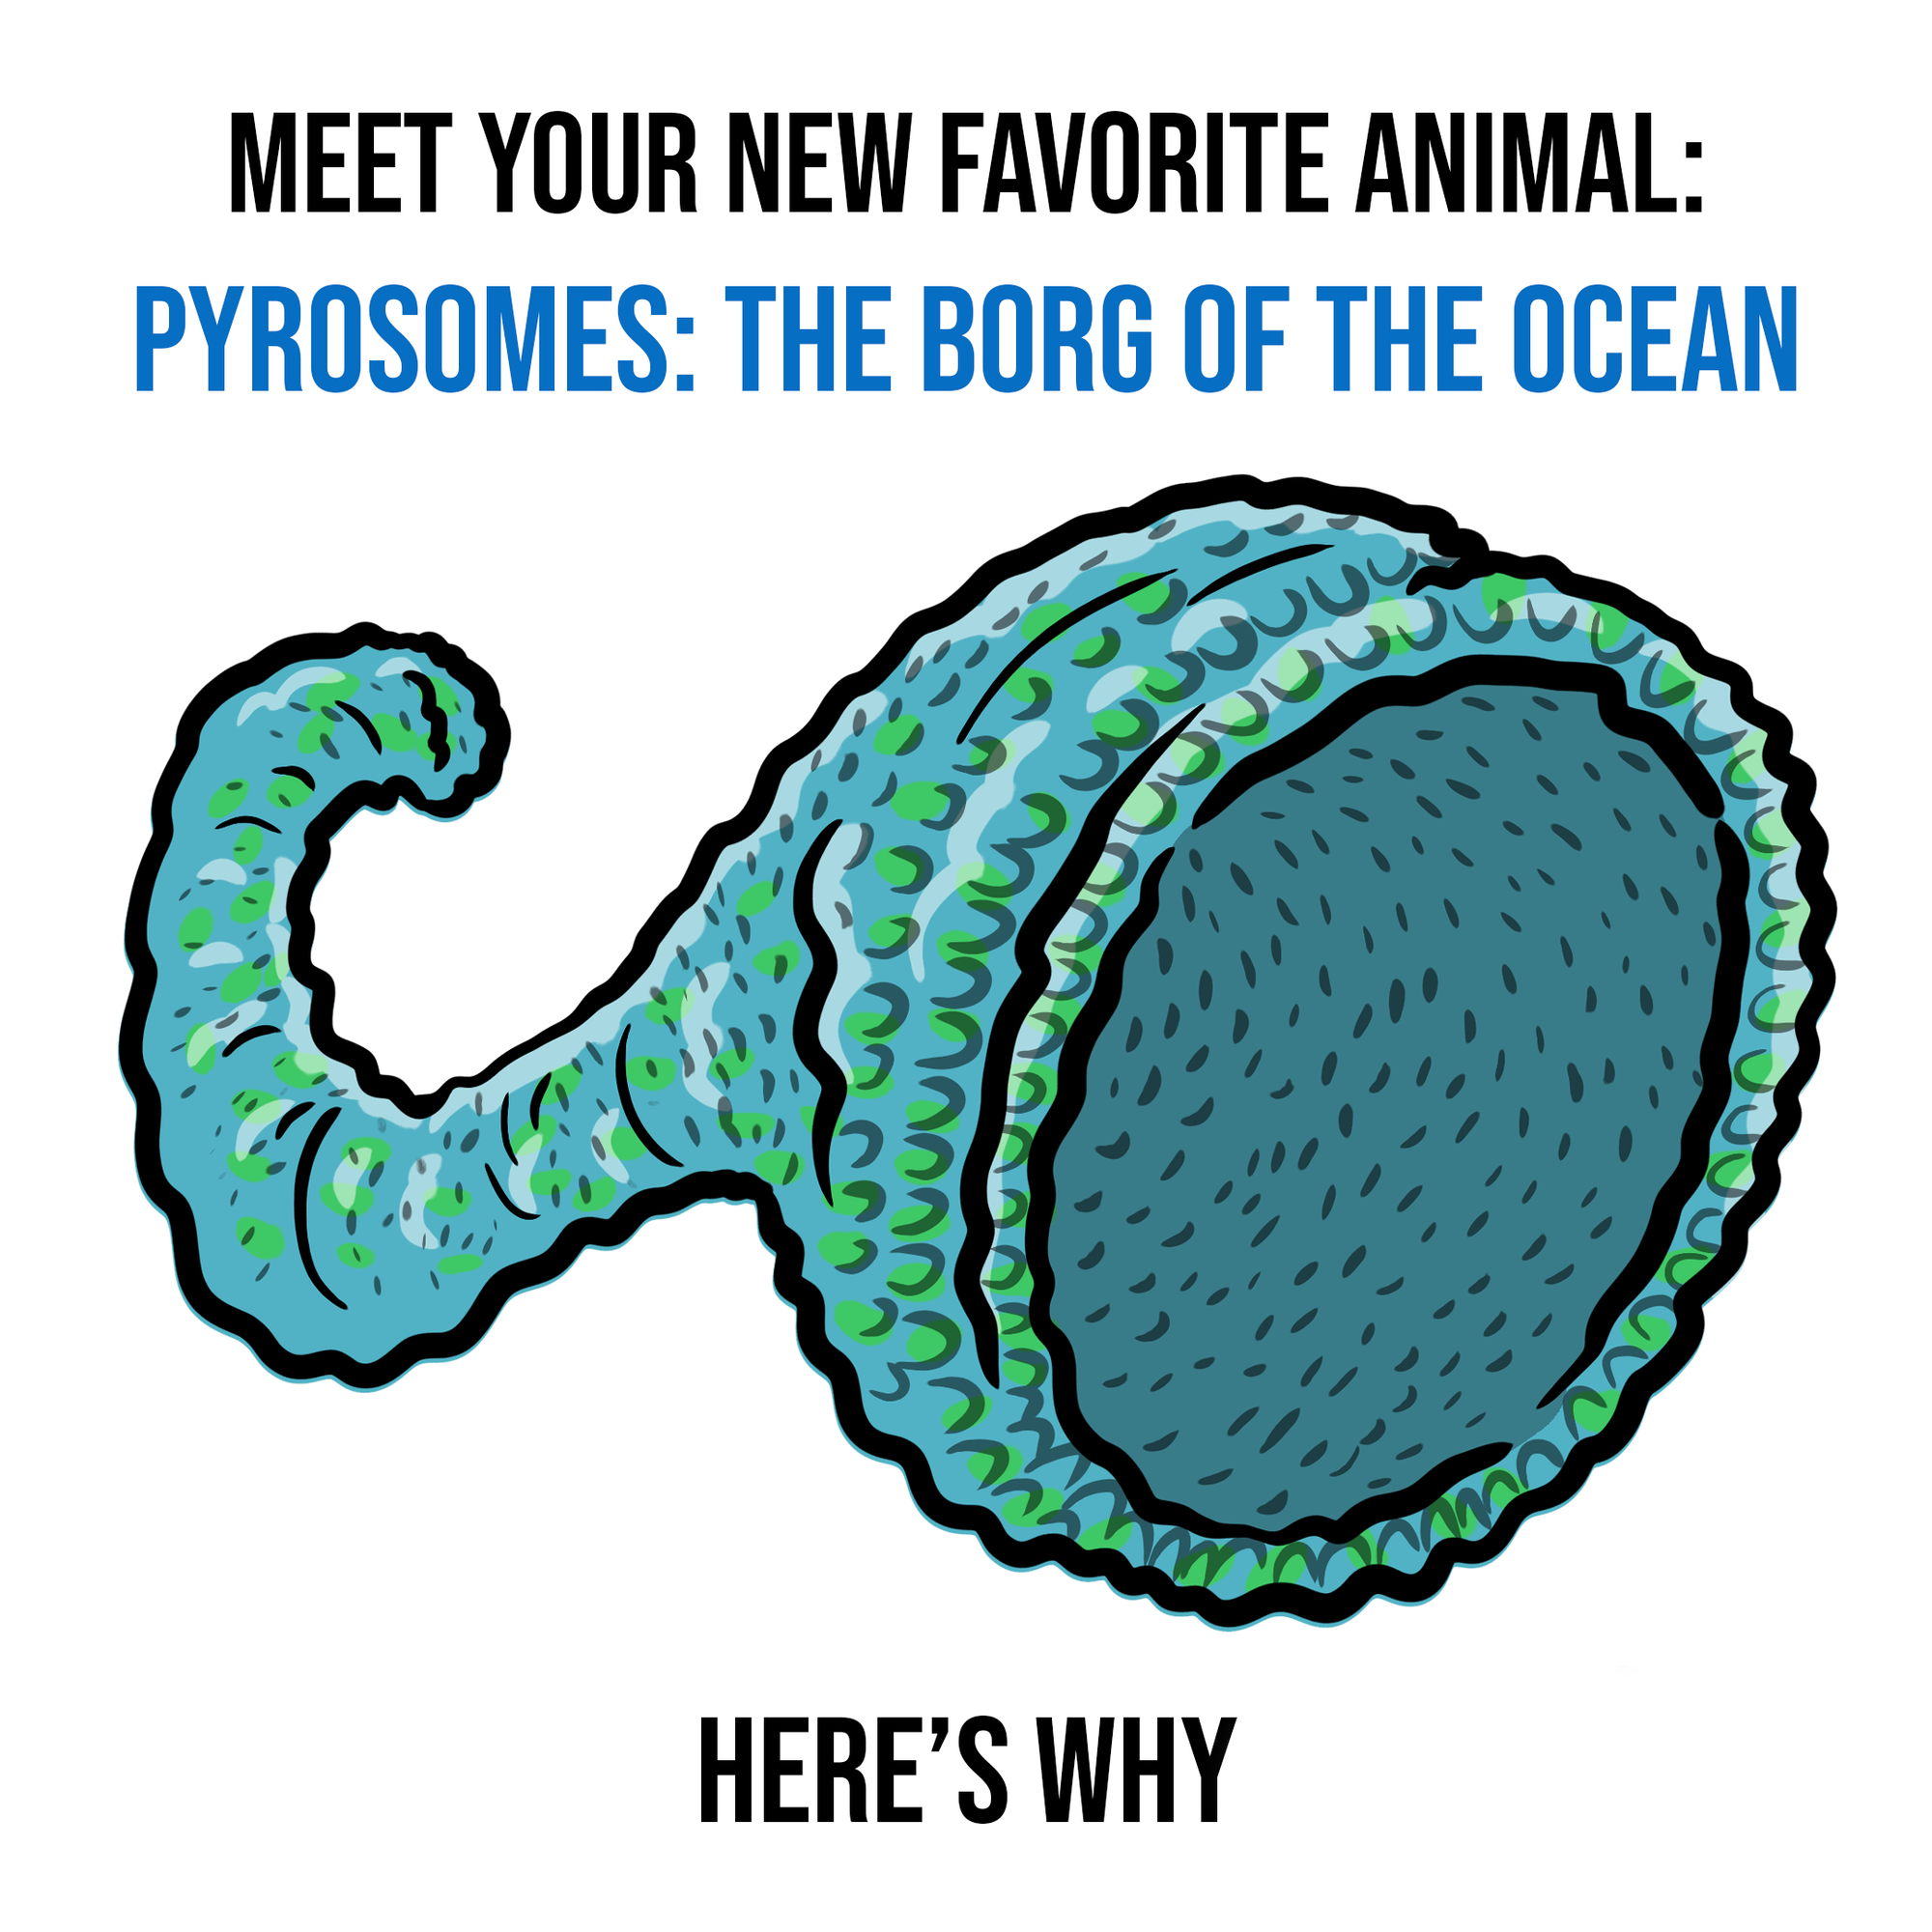 Your New Favorite Animal: Pyrosomes, the Borg of the Ocean